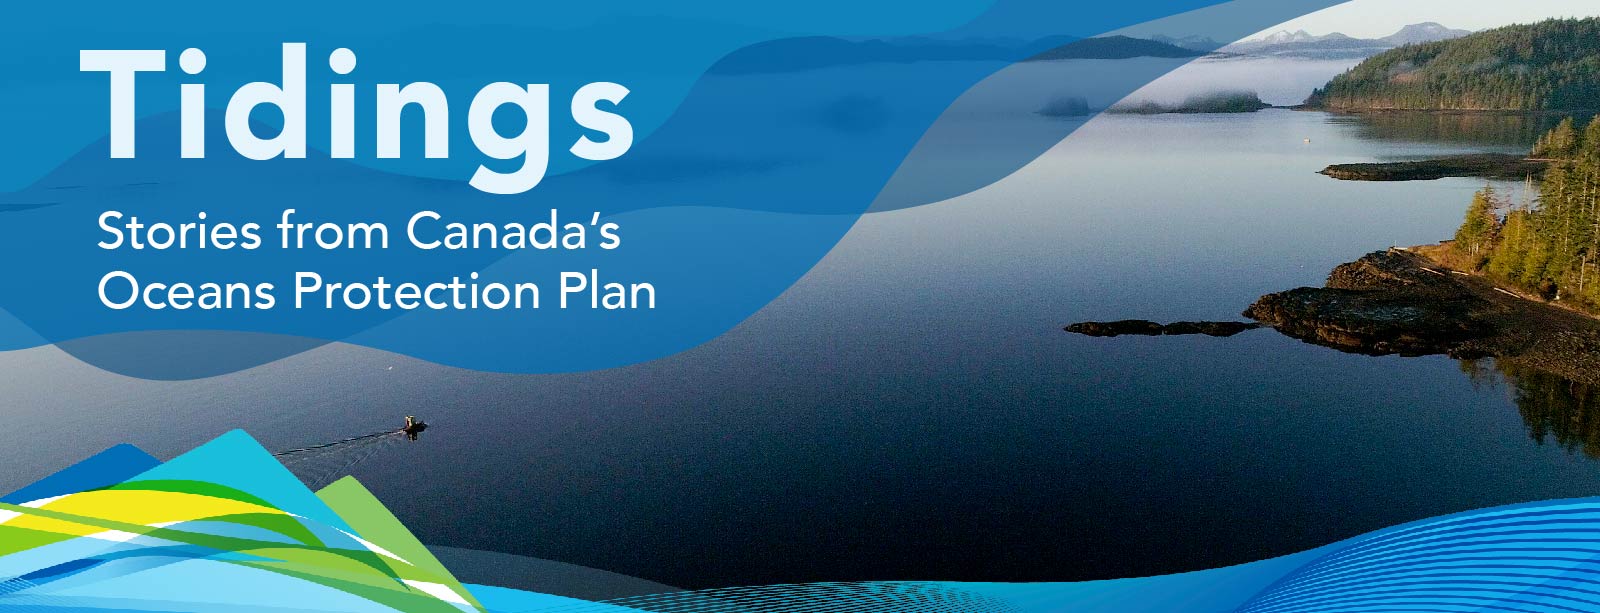 Tidings: Stories from Canada's Oceans Protection Plan